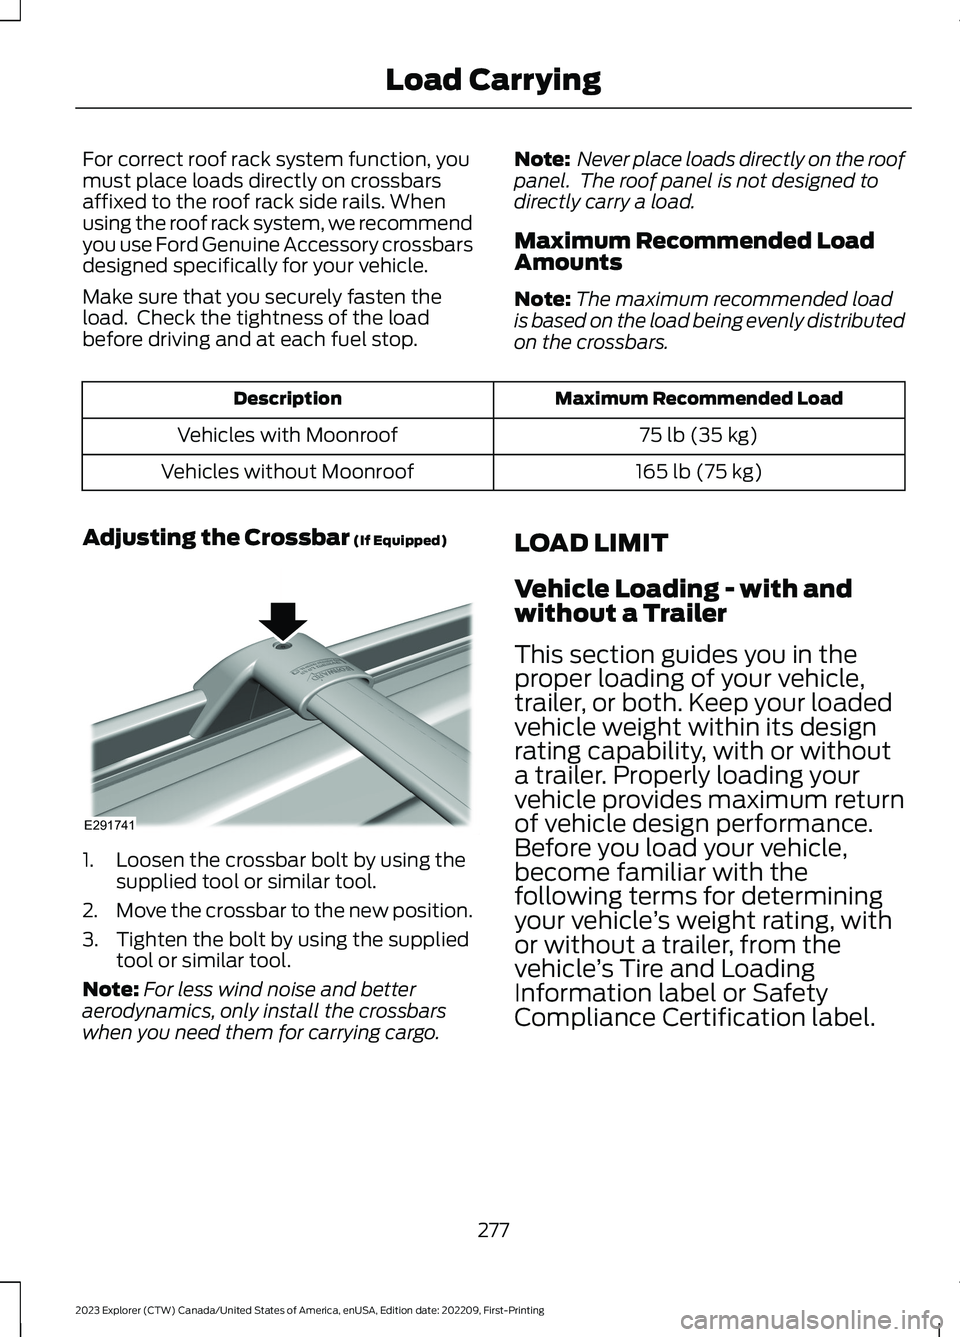 FORD EXPLORER 2023  Owners Manual For correct roof rack system function, youmust place loads directly on crossbarsaffixed to the roof rack side rails. Whenusing the roof rack system, we recommendyou use Ford Genuine Accessory crossbar